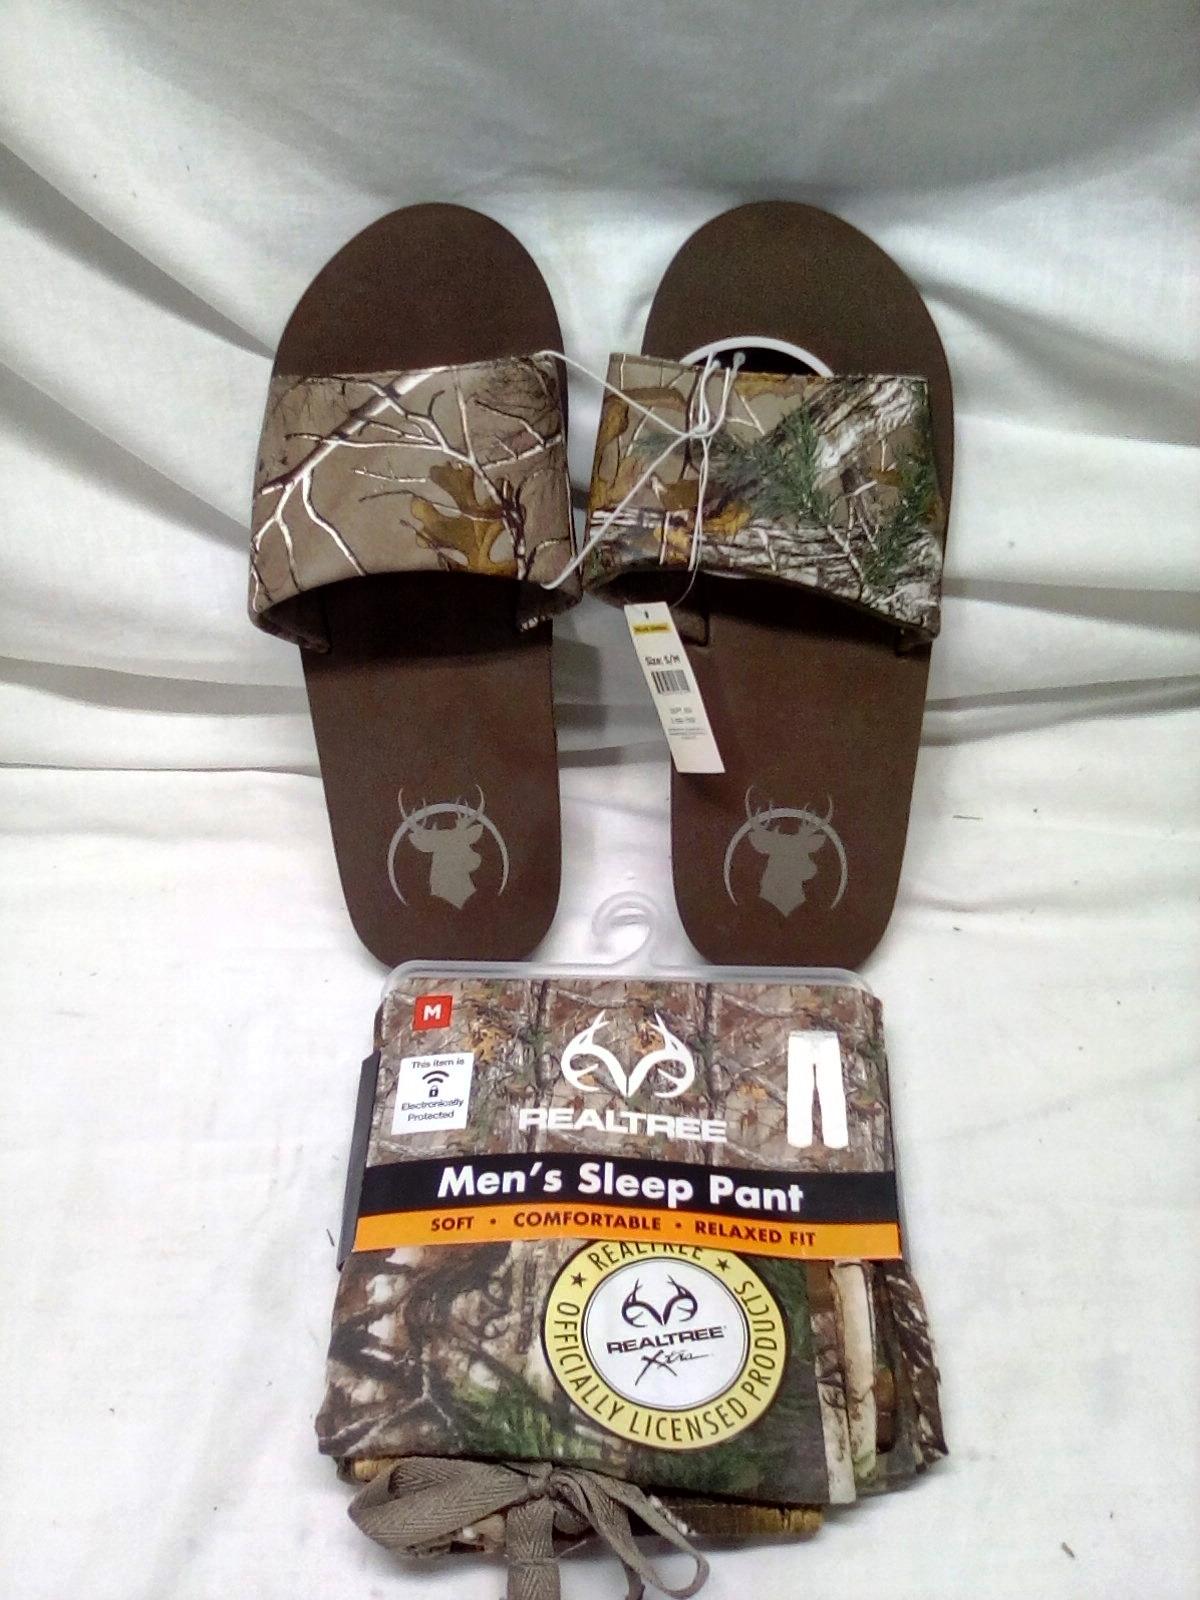 Realtree mens sleep pants size M with S/M sandals